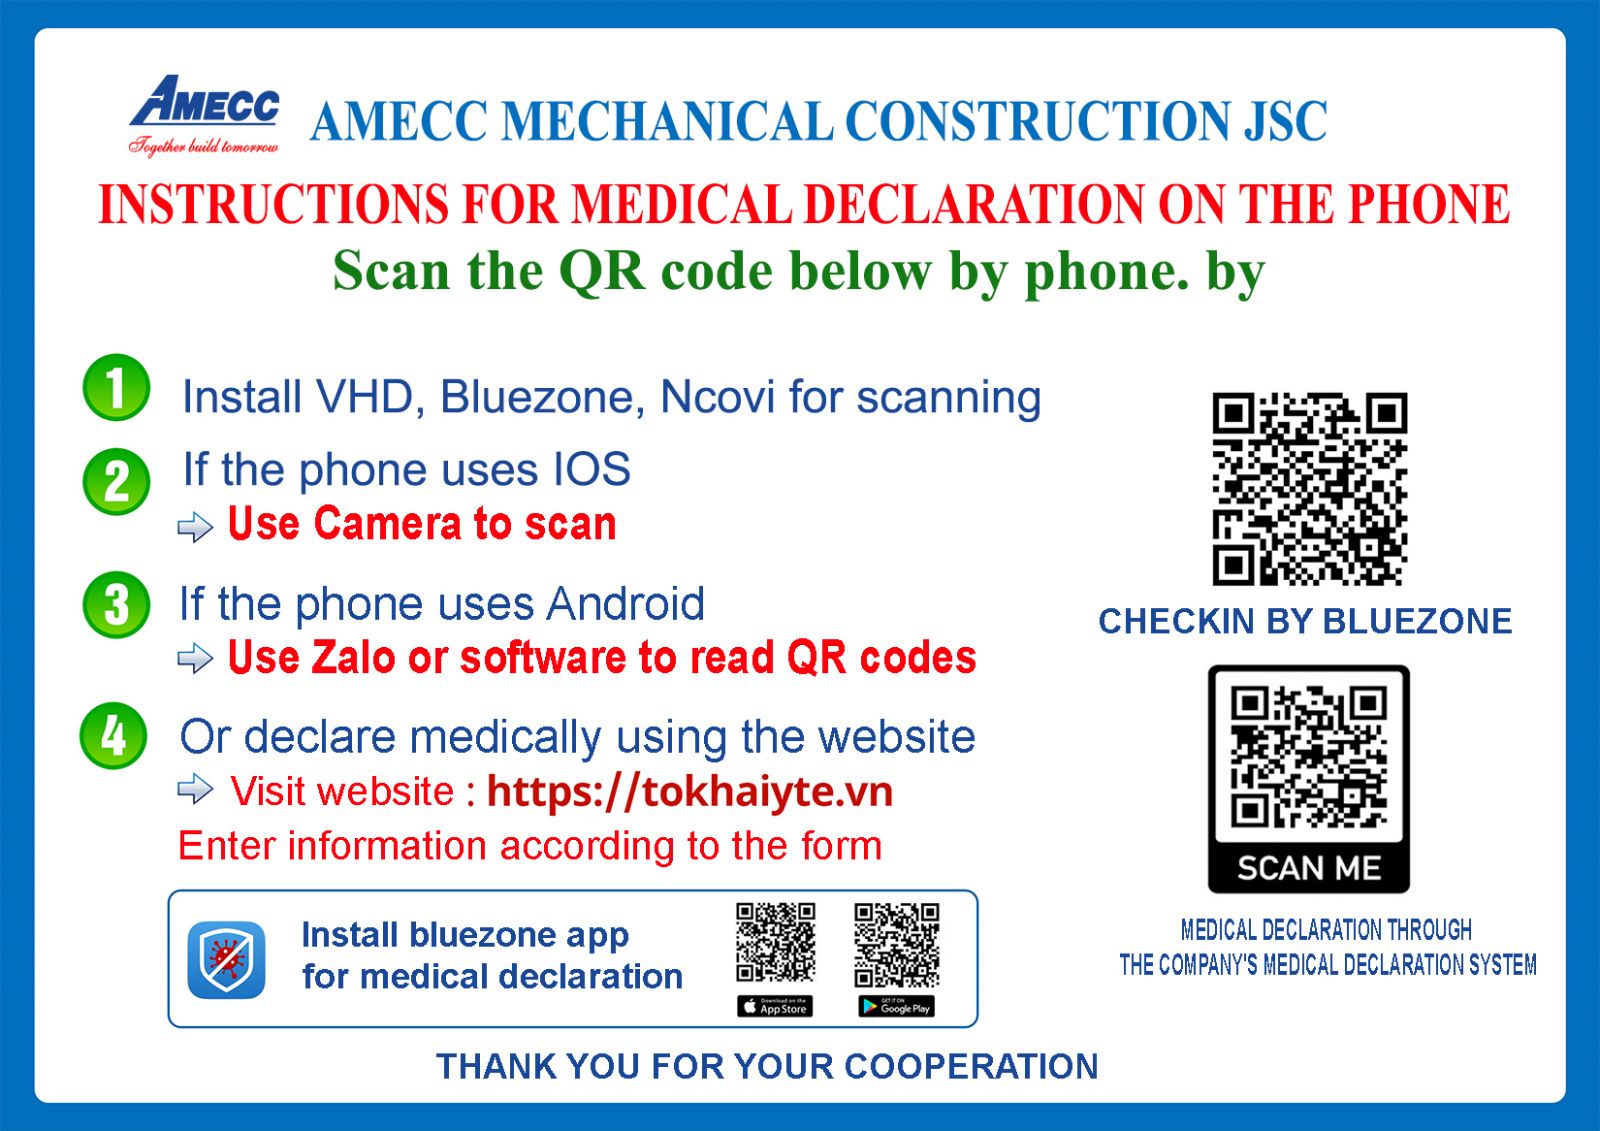 AMECC - ENHANCE MEDICAL DECLARATION WHEN COMING TO WORK AT THE COMPANY